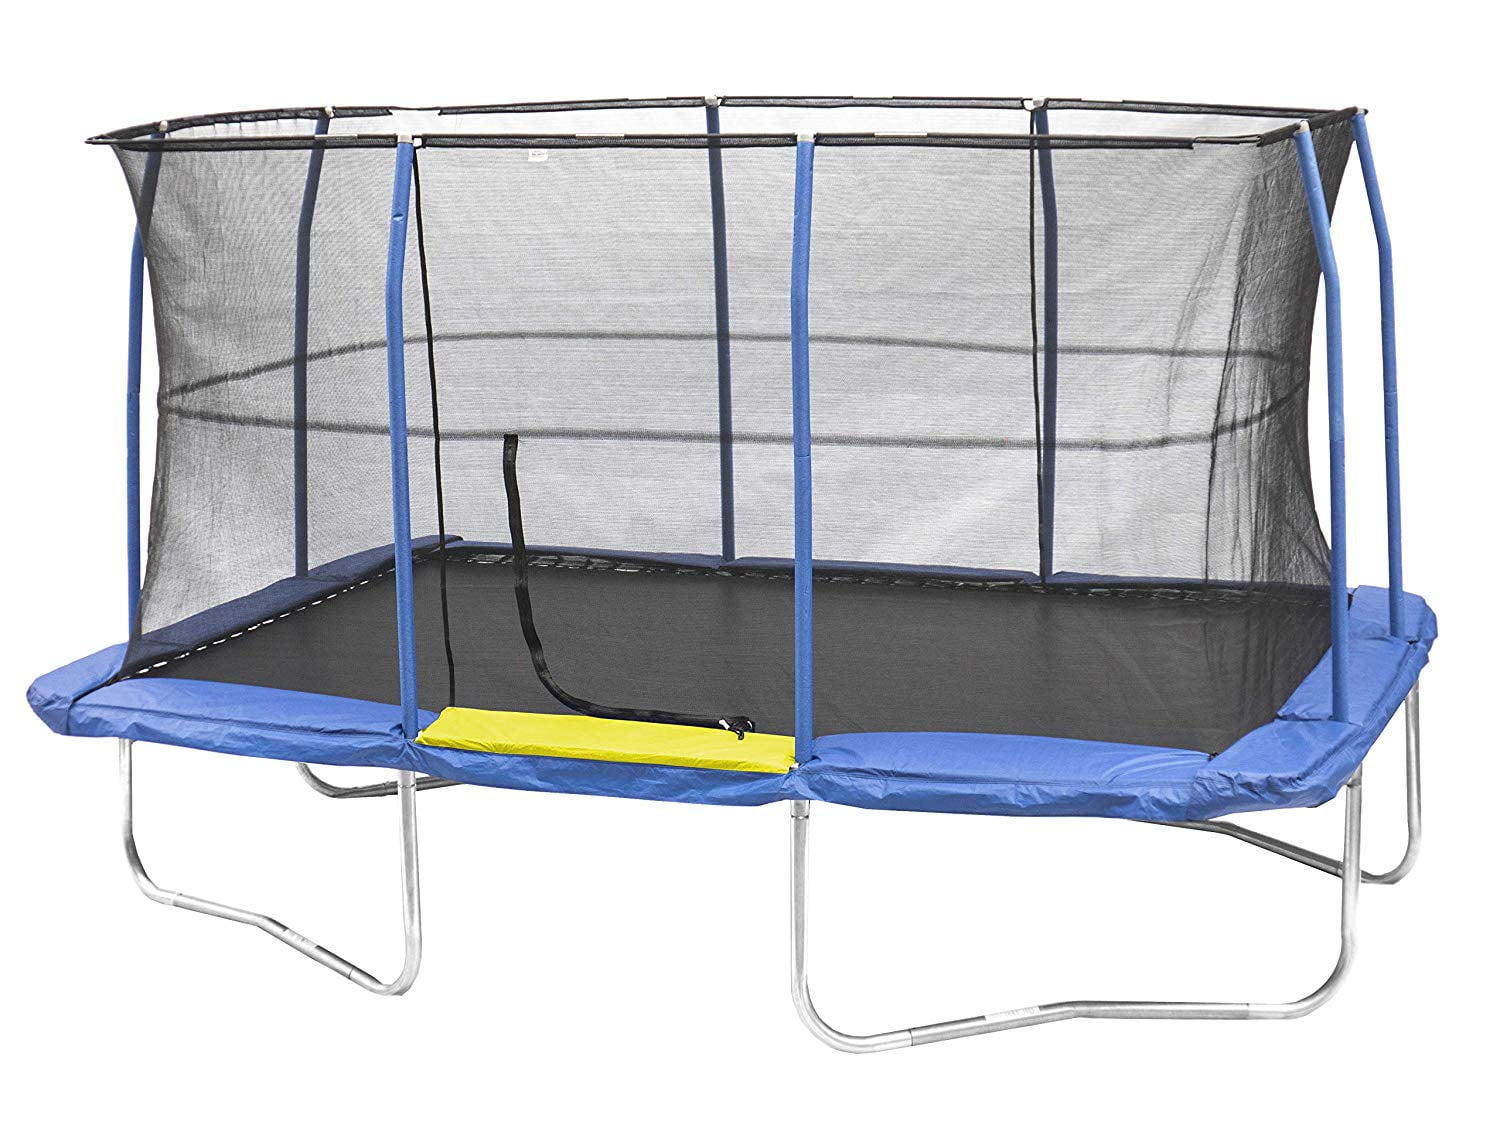 Toys Jumpking 10ft x 14ft Rectangular Trampoline with Enclosure ...